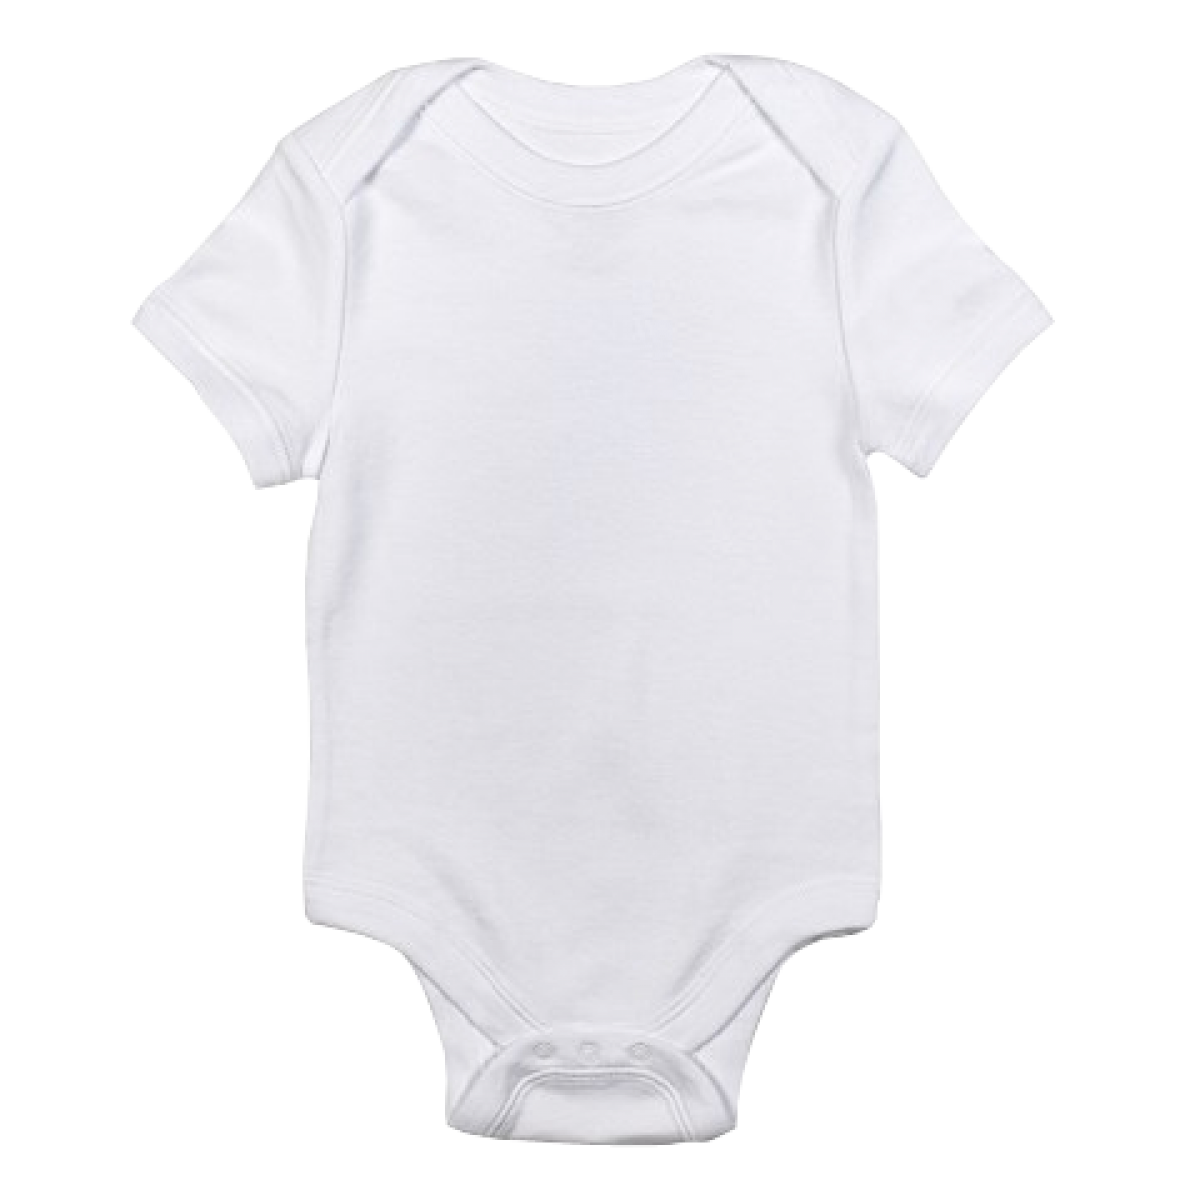 Baby Onesie Outline Clip Art Children S And Babies Clothes ...